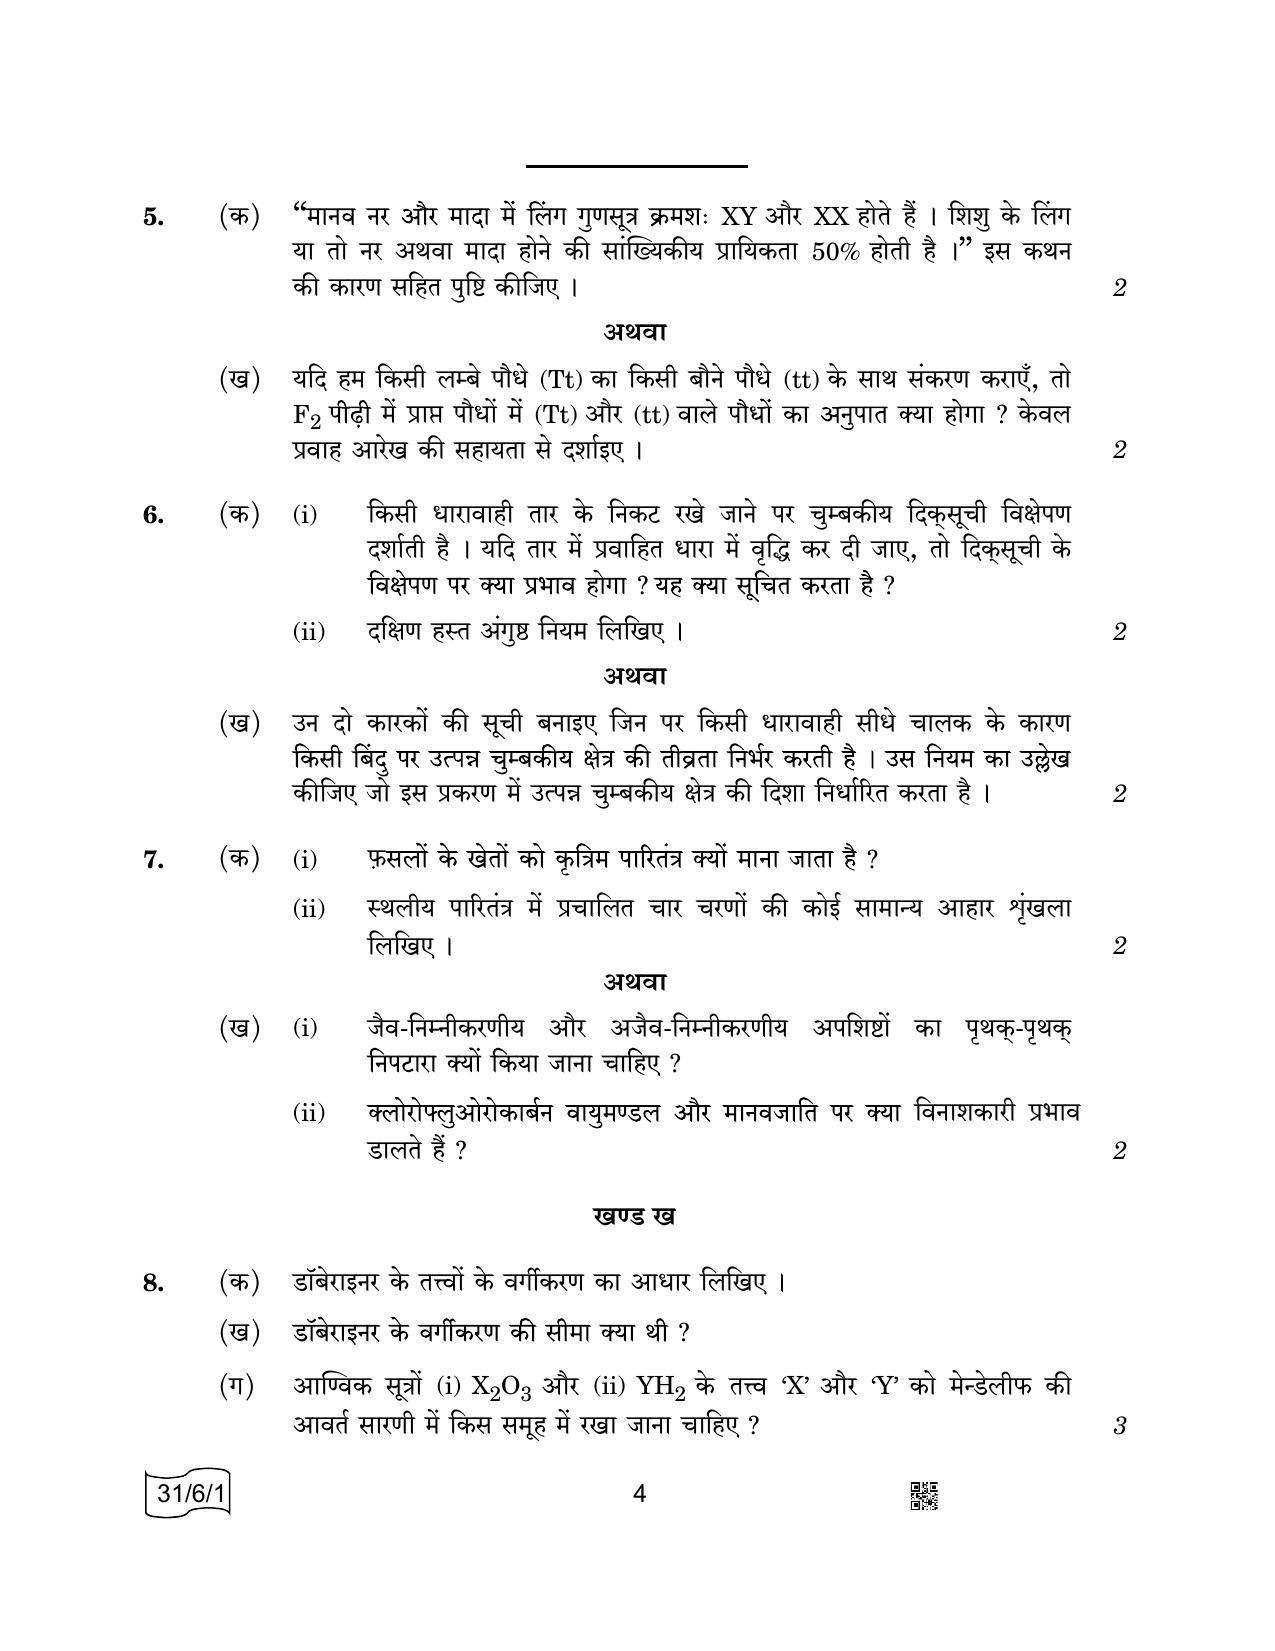 CBSE Class 10 31-6-1 SCIENCE 2022 Compartment Question Paper - Page 4